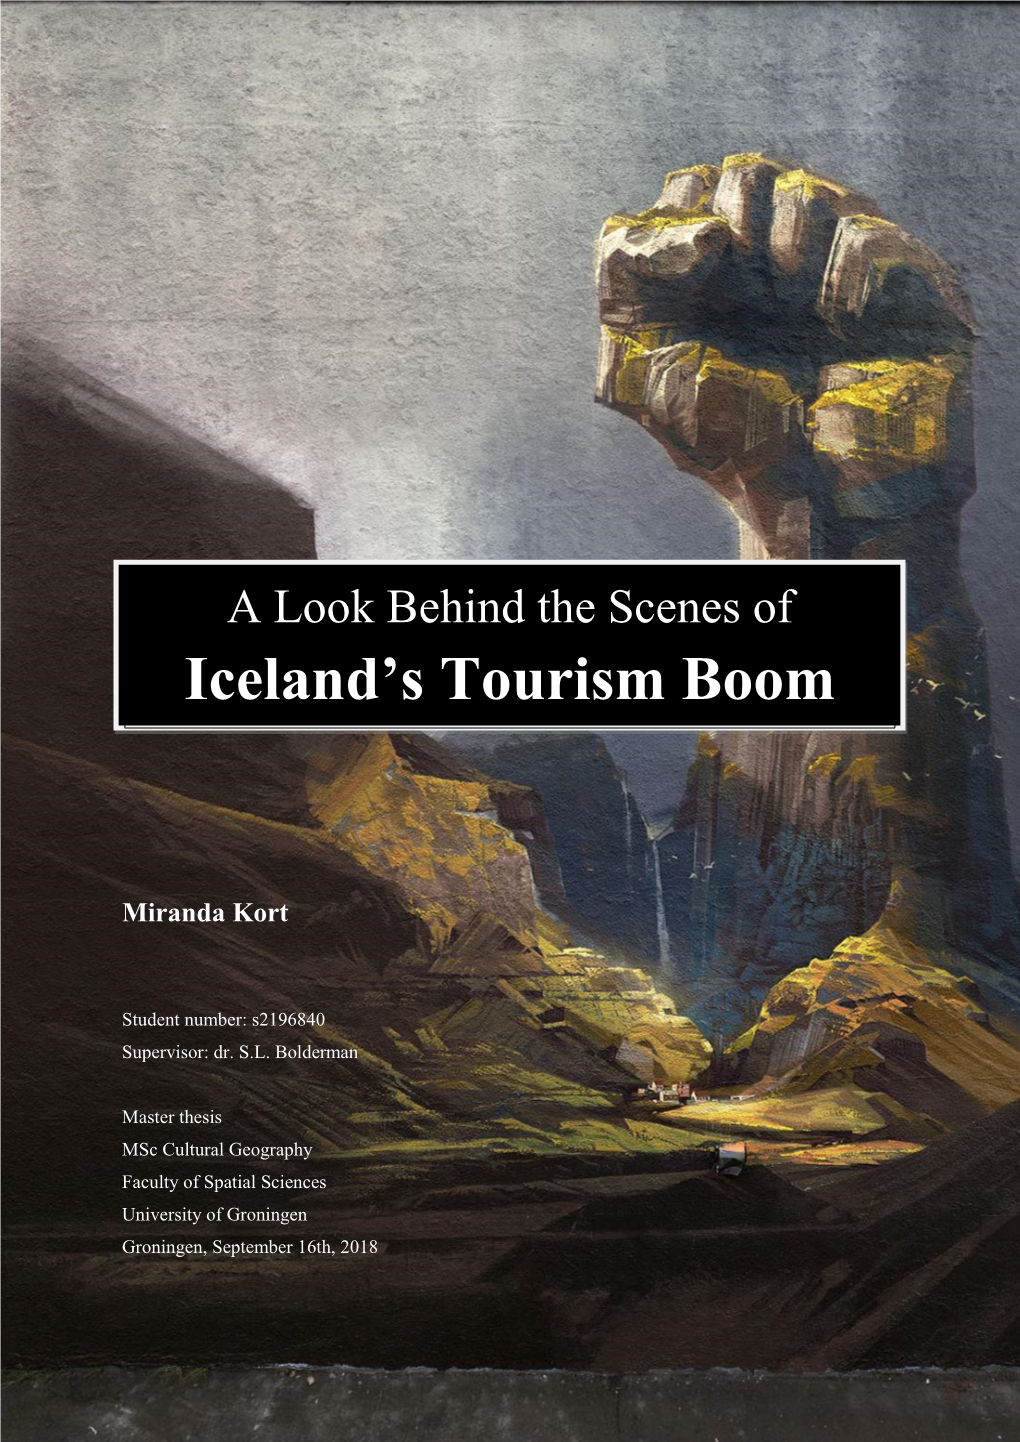 Iceland's Tourism Boom in Figures